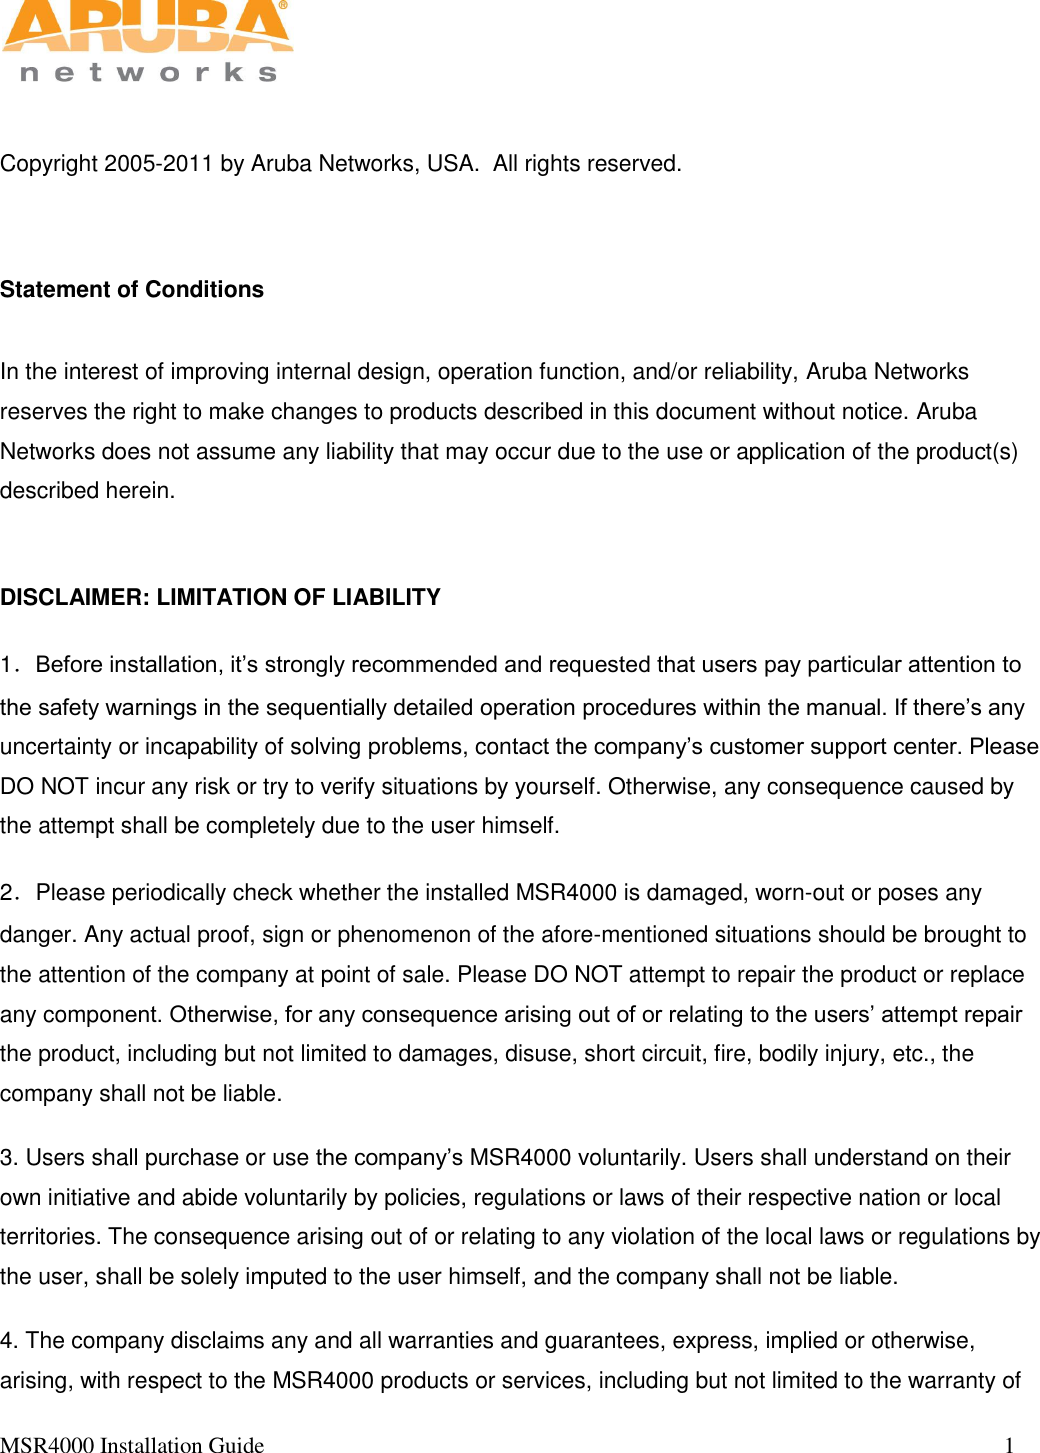   MSR4000 Installation Guide                                                                                                                                 1        Copyright 2005-2011 by Aruba Networks, USA.  All rights reserved.   Statement of Conditions  In the interest of improving internal design, operation function, and/or reliability, Aruba Networks reserves the right to make changes to products described in this document without notice. Aruba Networks does not assume any liability that may occur due to the use or application of the product(s) described herein.  DISCLAIMER: LIMITATION OF LIABILITY 1．Before installation, it’s strongly recommended and requested that users pay particular attention to the safety warnings in the sequentially detailed operation procedures within the manual. If there’s any uncertainty or incapability of solving problems, contact the company’s customer support center. Please DO NOT incur any risk or try to verify situations by yourself. Otherwise, any consequence caused by the attempt shall be completely due to the user himself. 2．Please periodically check whether the installed MSR4000 is damaged, worn-out or poses any danger. Any actual proof, sign or phenomenon of the afore-mentioned situations should be brought to the attention of the company at point of sale. Please DO NOT attempt to repair the product or replace any component. Otherwise, for any consequence arising out of or relating to the users’ attempt repair the product, including but not limited to damages, disuse, short circuit, fire, bodily injury, etc., the company shall not be liable. 3. Users shall purchase or use the company’s MSR4000 voluntarily. Users shall understand on their own initiative and abide voluntarily by policies, regulations or laws of their respective nation or local territories. The consequence arising out of or relating to any violation of the local laws or regulations by the user, shall be solely imputed to the user himself, and the company shall not be liable. 4. The company disclaims any and all warranties and guarantees, express, implied or otherwise, arising, with respect to the MSR4000 products or services, including but not limited to the warranty of 